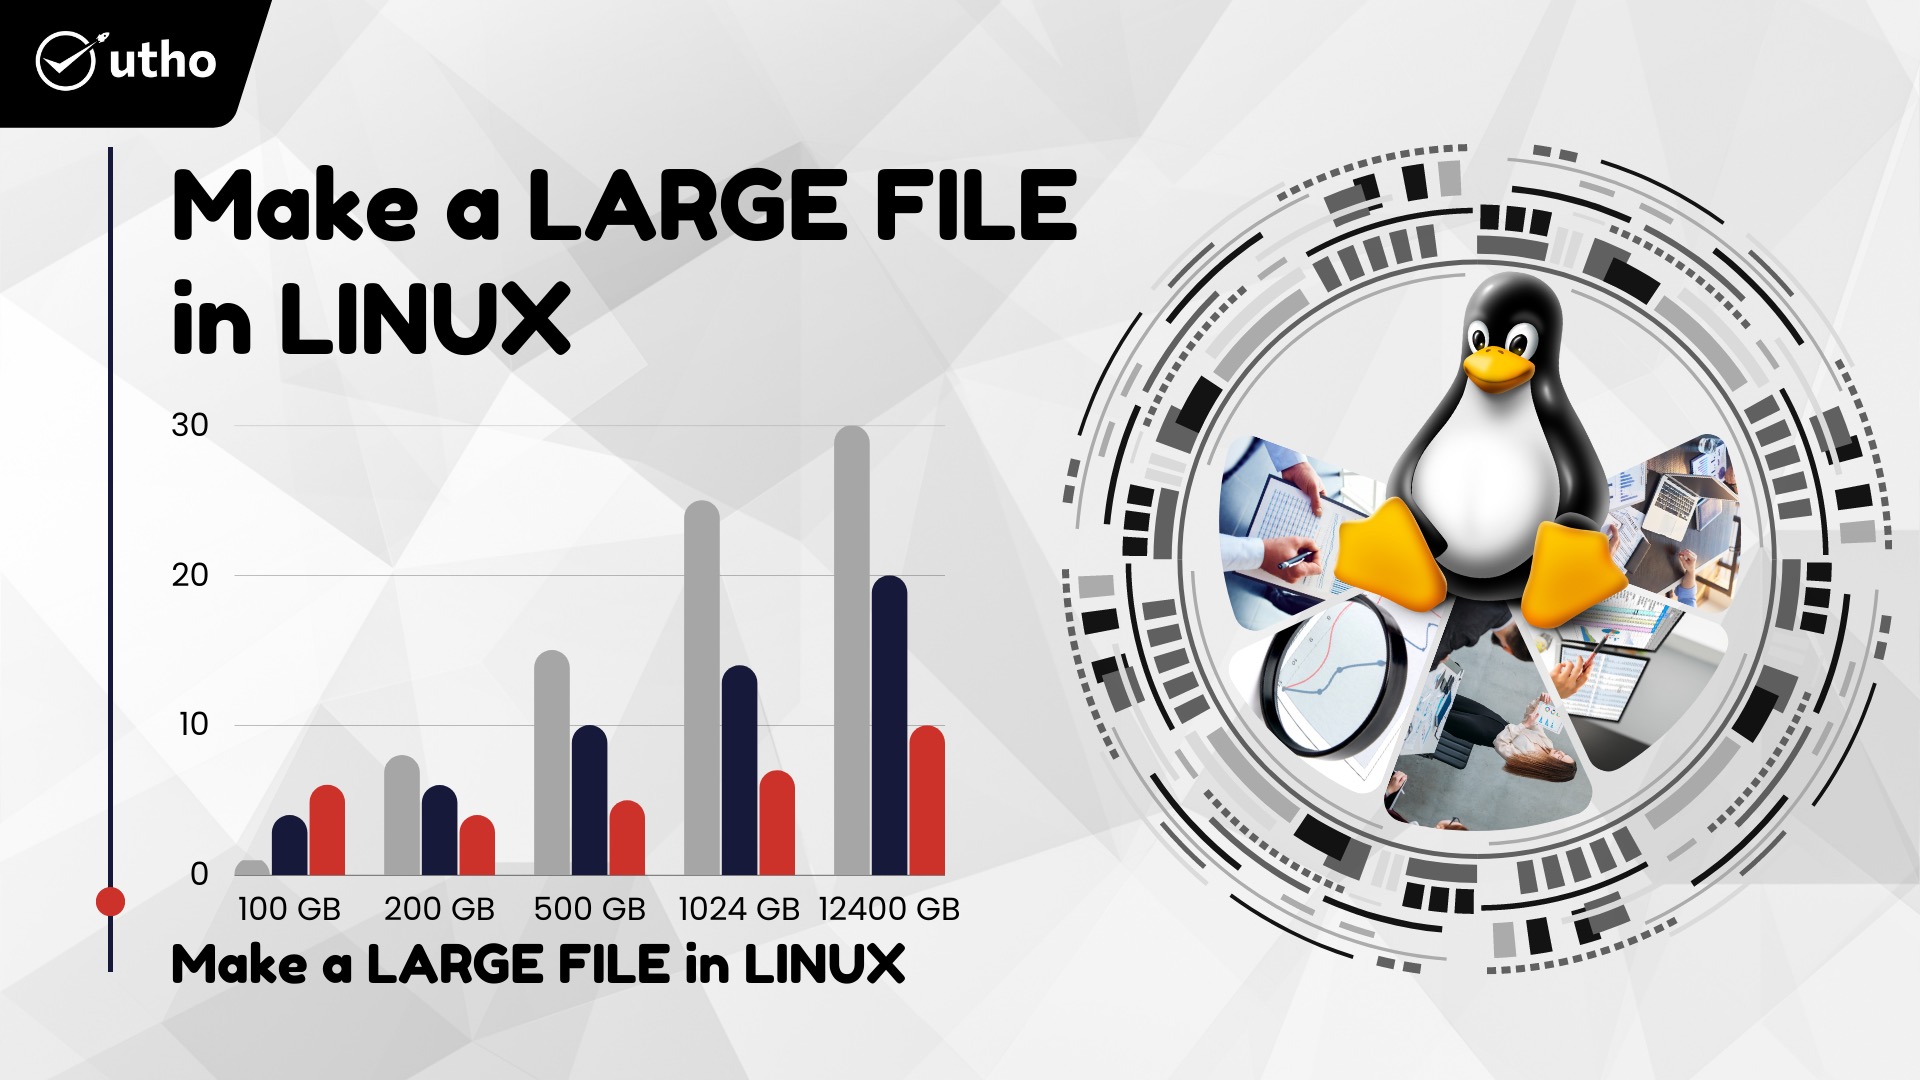 How to Make a Large File in Linux